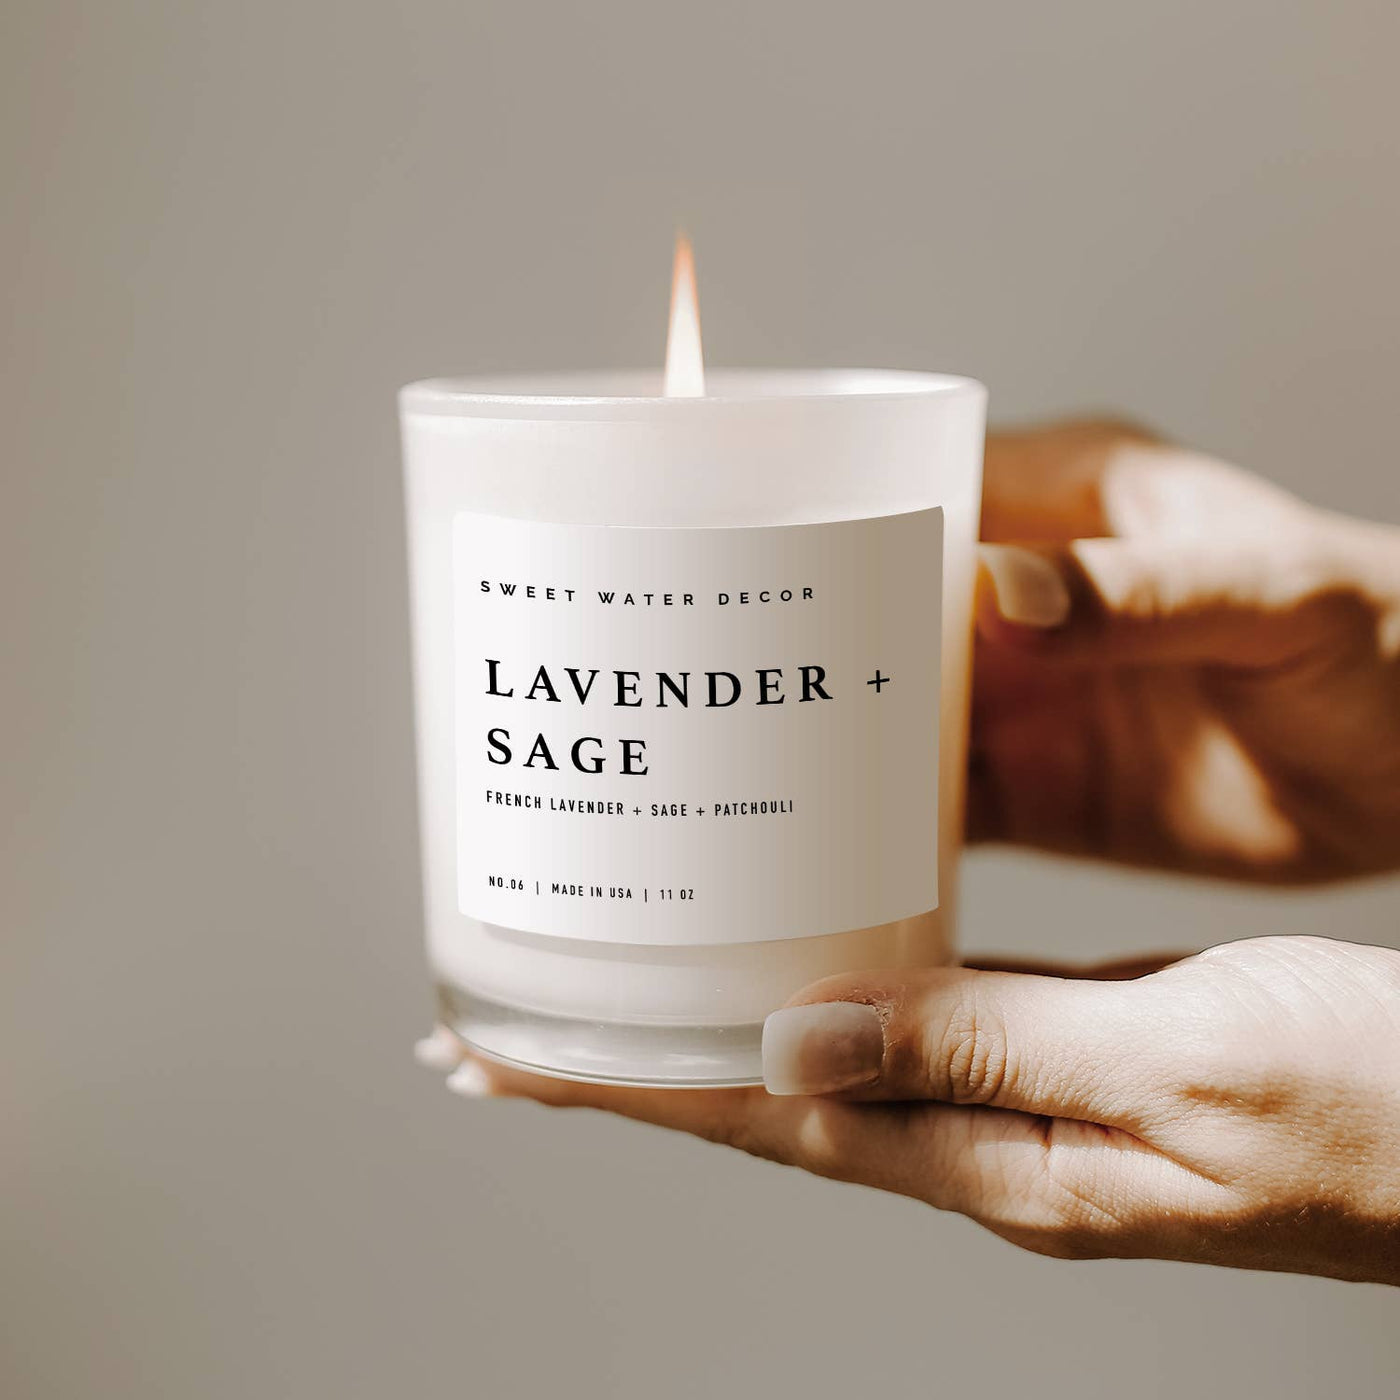 Lavender and Sage 11 oz Soy Candle - Home Decor & Gifts